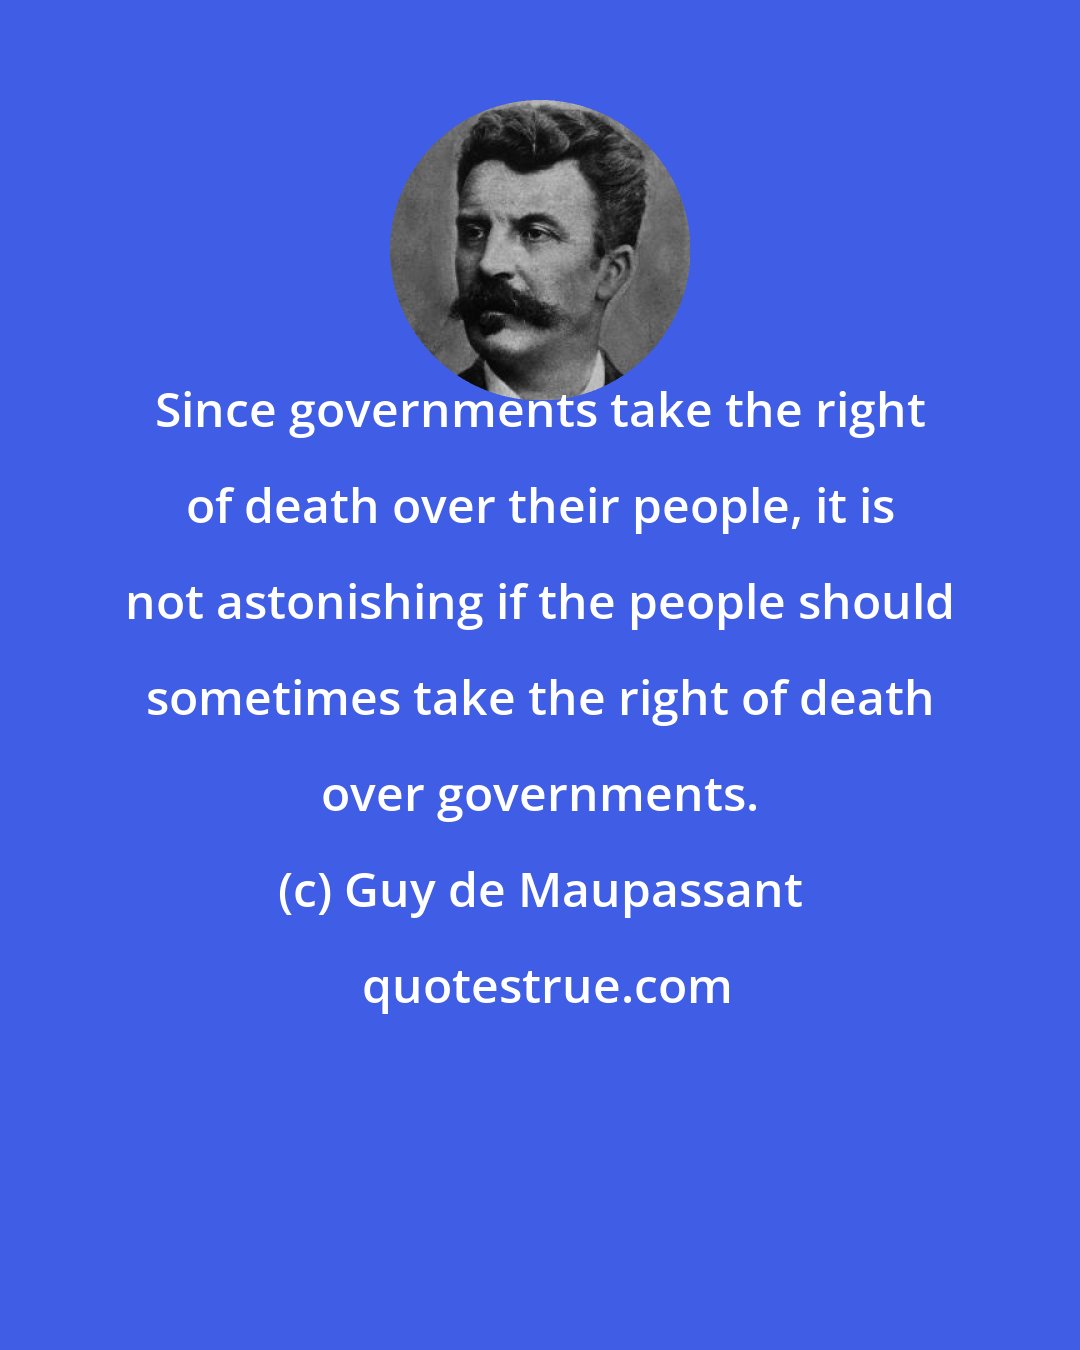 Guy de Maupassant: Since governments take the right of death over their people, it is not astonishing if the people should sometimes take the right of death over governments.